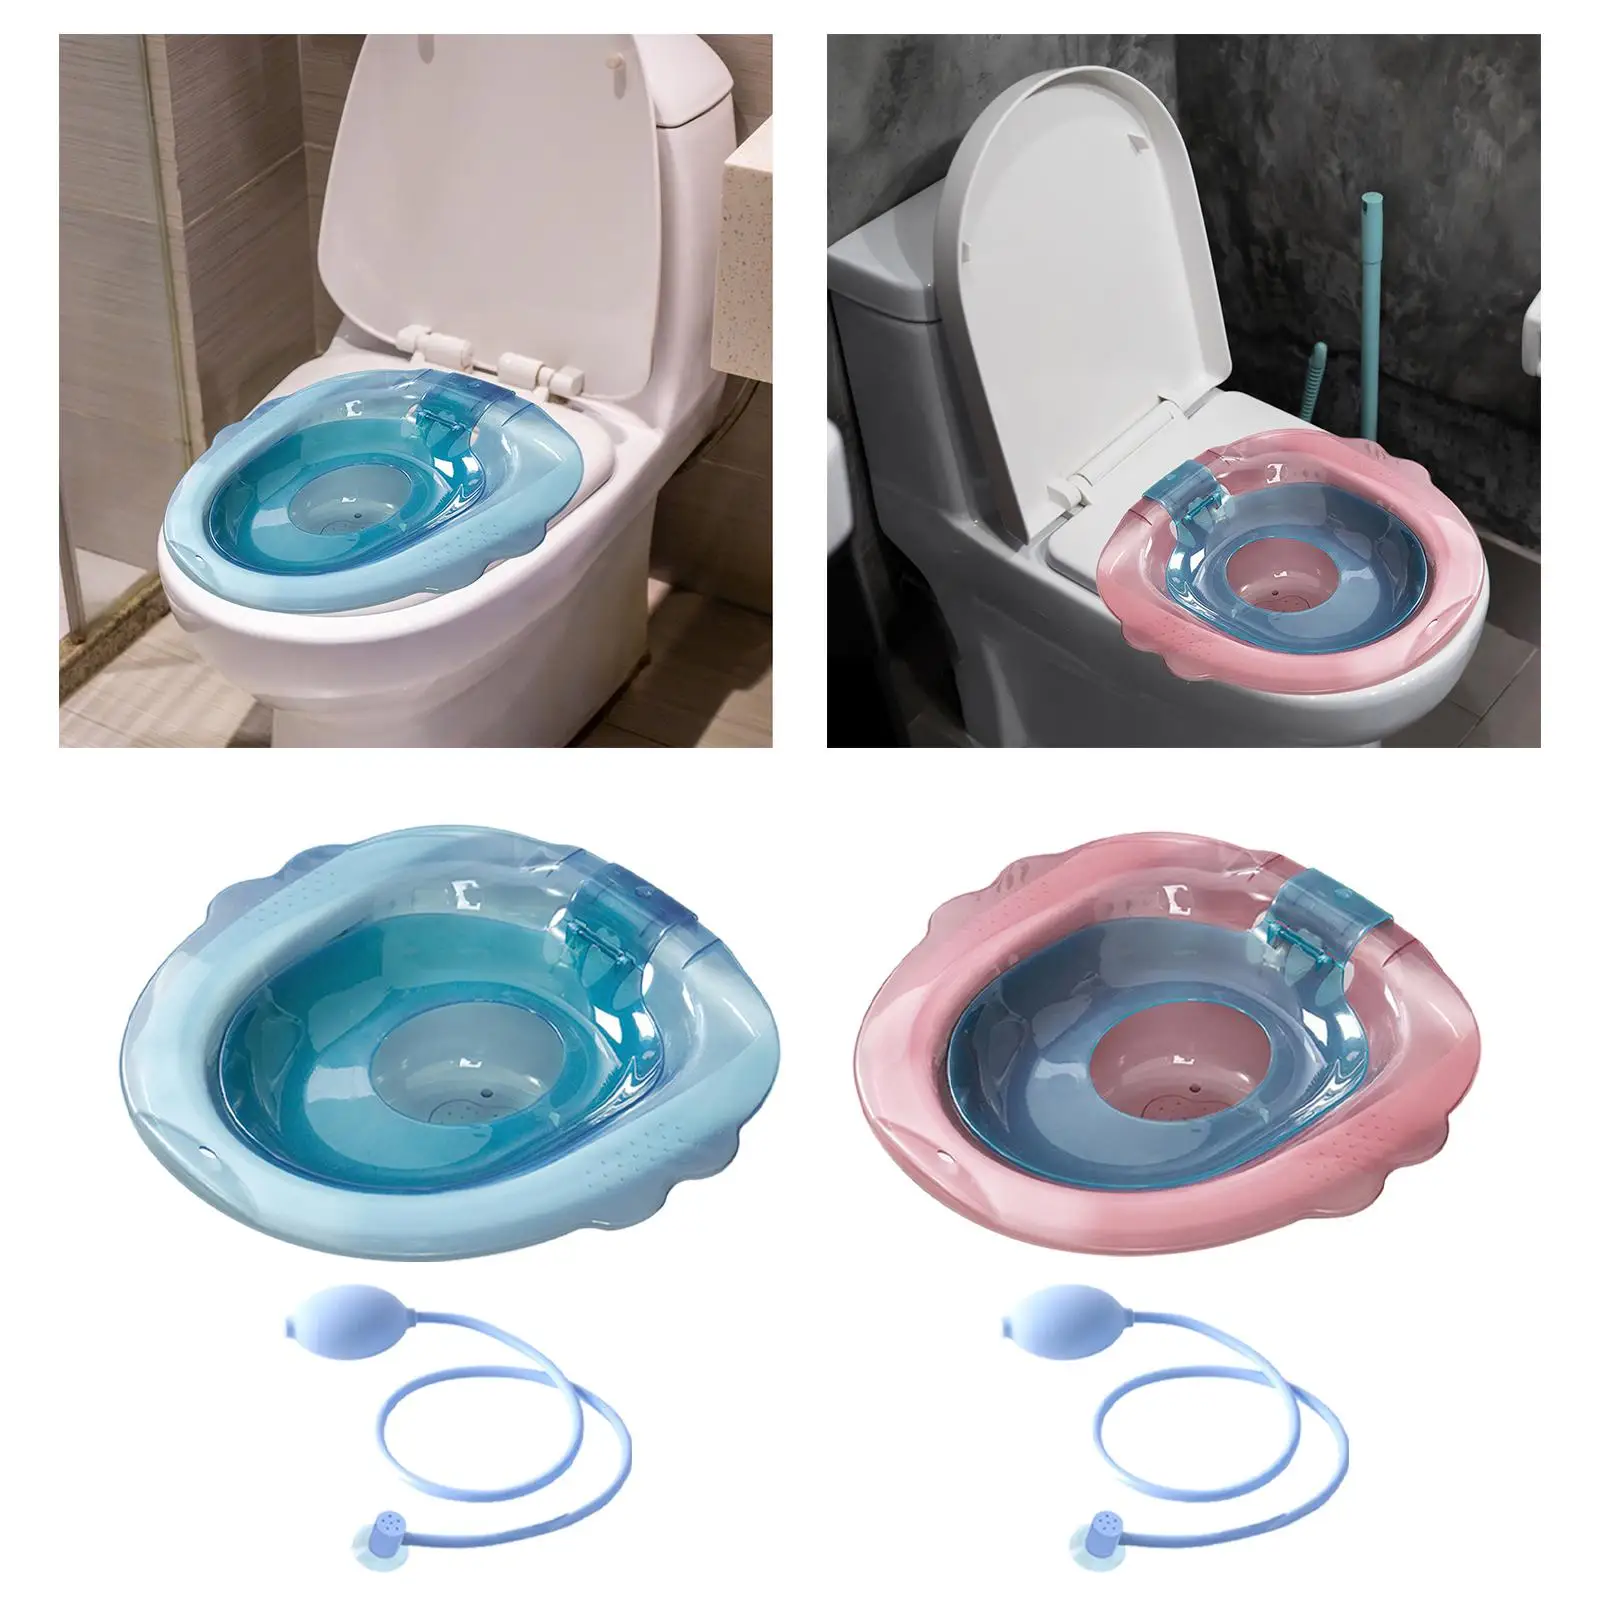 Toilet Seat Sitz Bath Women Bidet Hip Bath Set Wide Seating Area Accessory Avoid Squats for Standard Toilets and Commode Chair